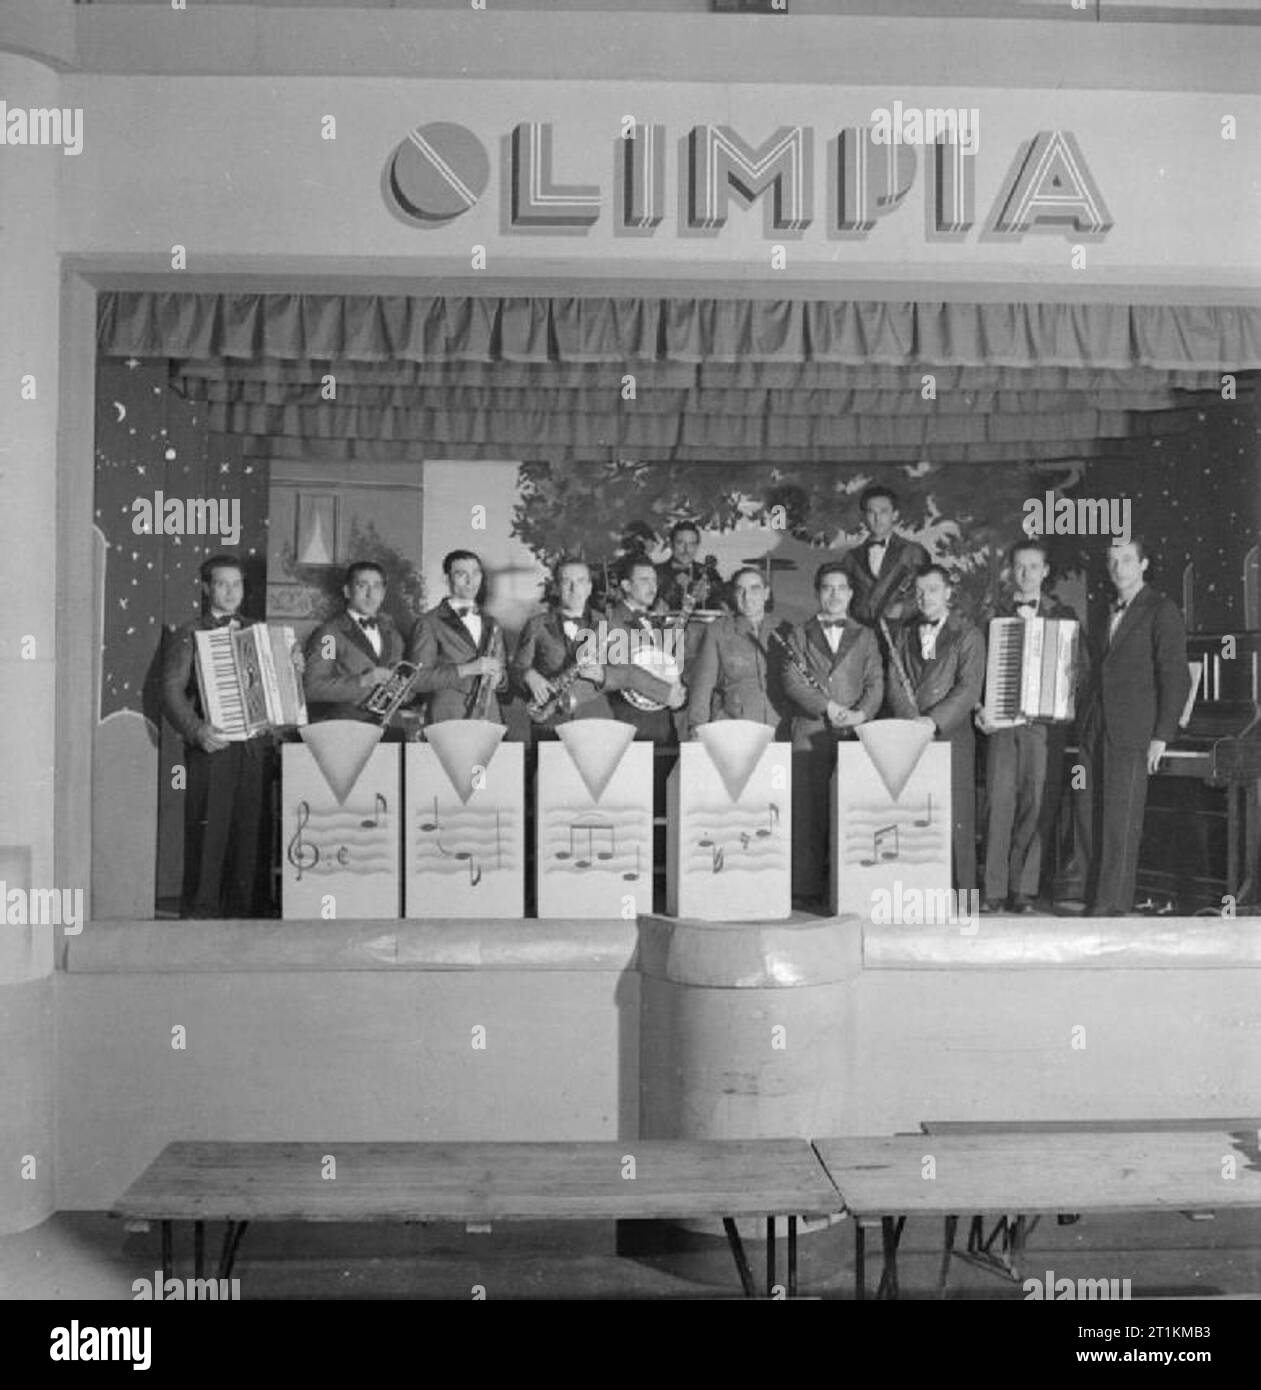 Italian Prisoners of War in Britain- Everyday Life at An Italian Pow Camp, England, UK, 1945 At the N.144 Italian workers camp, near London, the famous 'Seven Dwarves' orchestra pose with their instruments on the stage under a sign reading 'Olimpia'. Amongst the musicians are: Fernando Monticelli, Maestro Aldo Morbido, Salvatore Corsaro, Matteo Giannattasio, Carlo Forno, Alveste Migliorini, Amelio Salvadori, Vincenzo Verrecchia, Salvatore Mastria and Umberto Latini. The dance band includes a saxophone, two accordions, banjo, and piano. Stock Photo